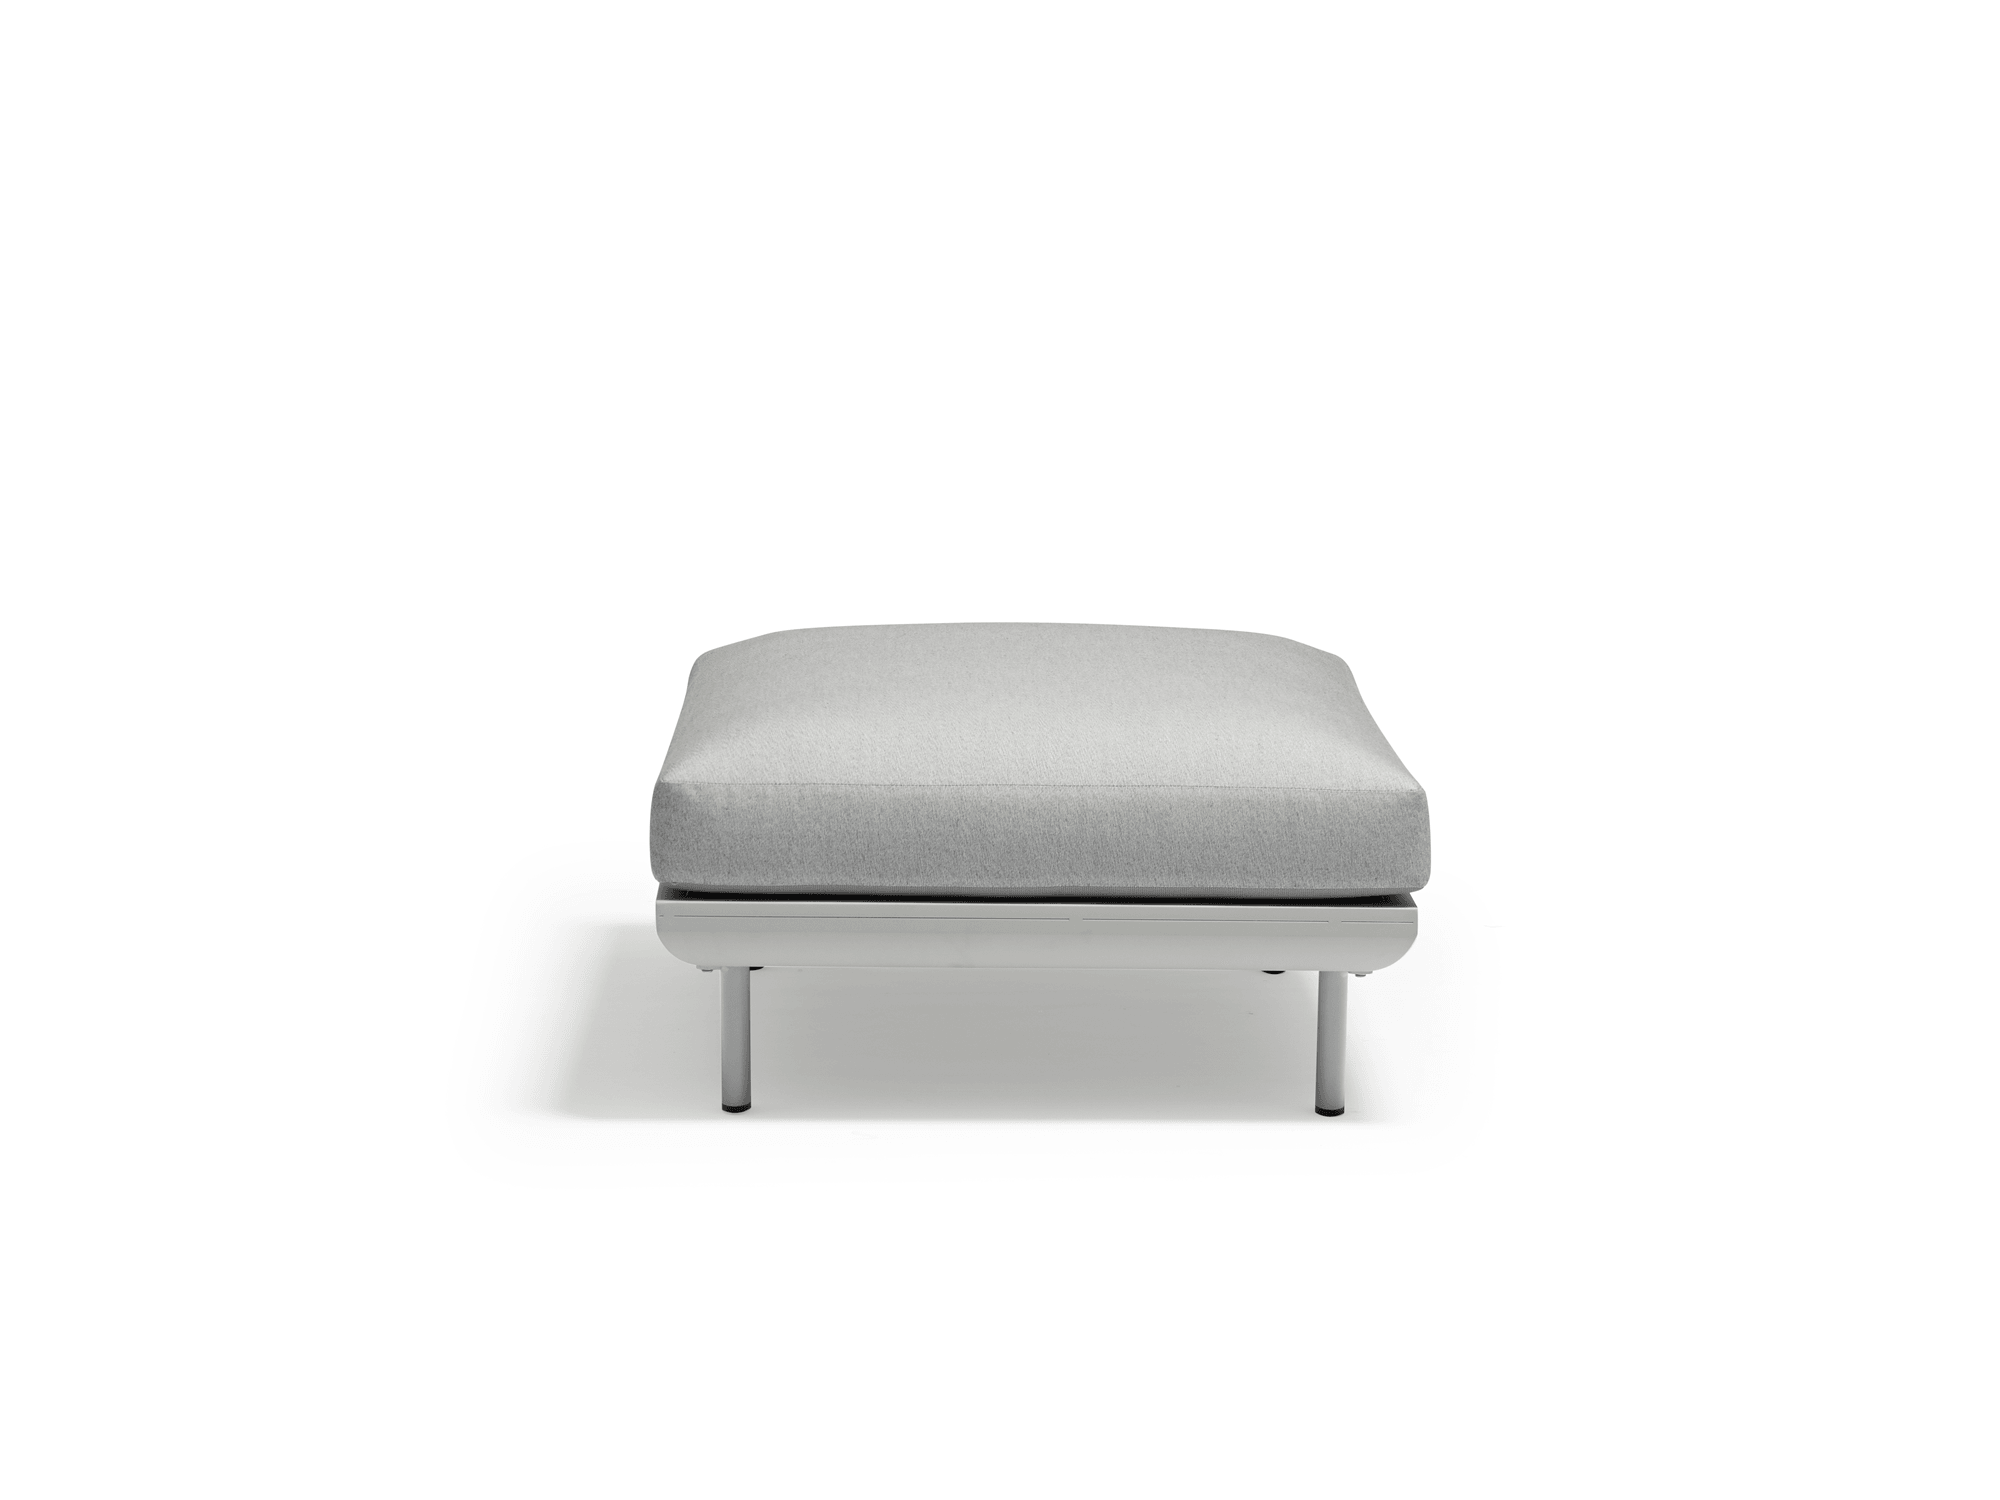 Amberly Outdoor Ottoman in Light Grey - Euro Living Furniture